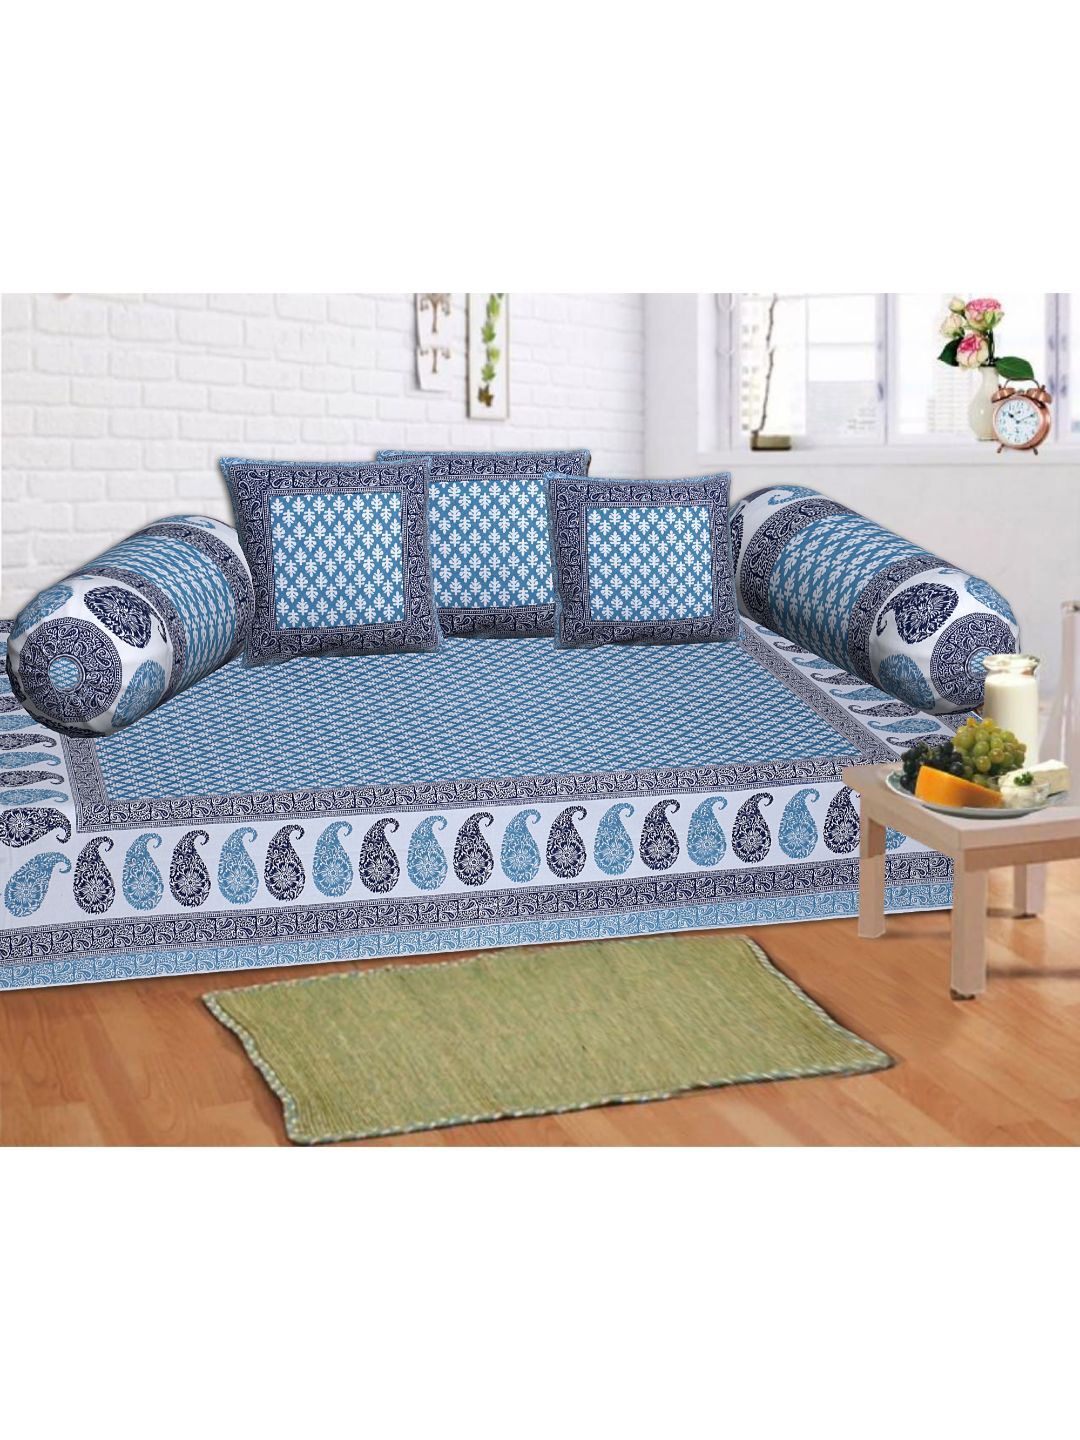 INDHOME LIFE Set Of 6 Blue & White Single Bedsheet With Bolster & Cushion Cover 300TC Price in India